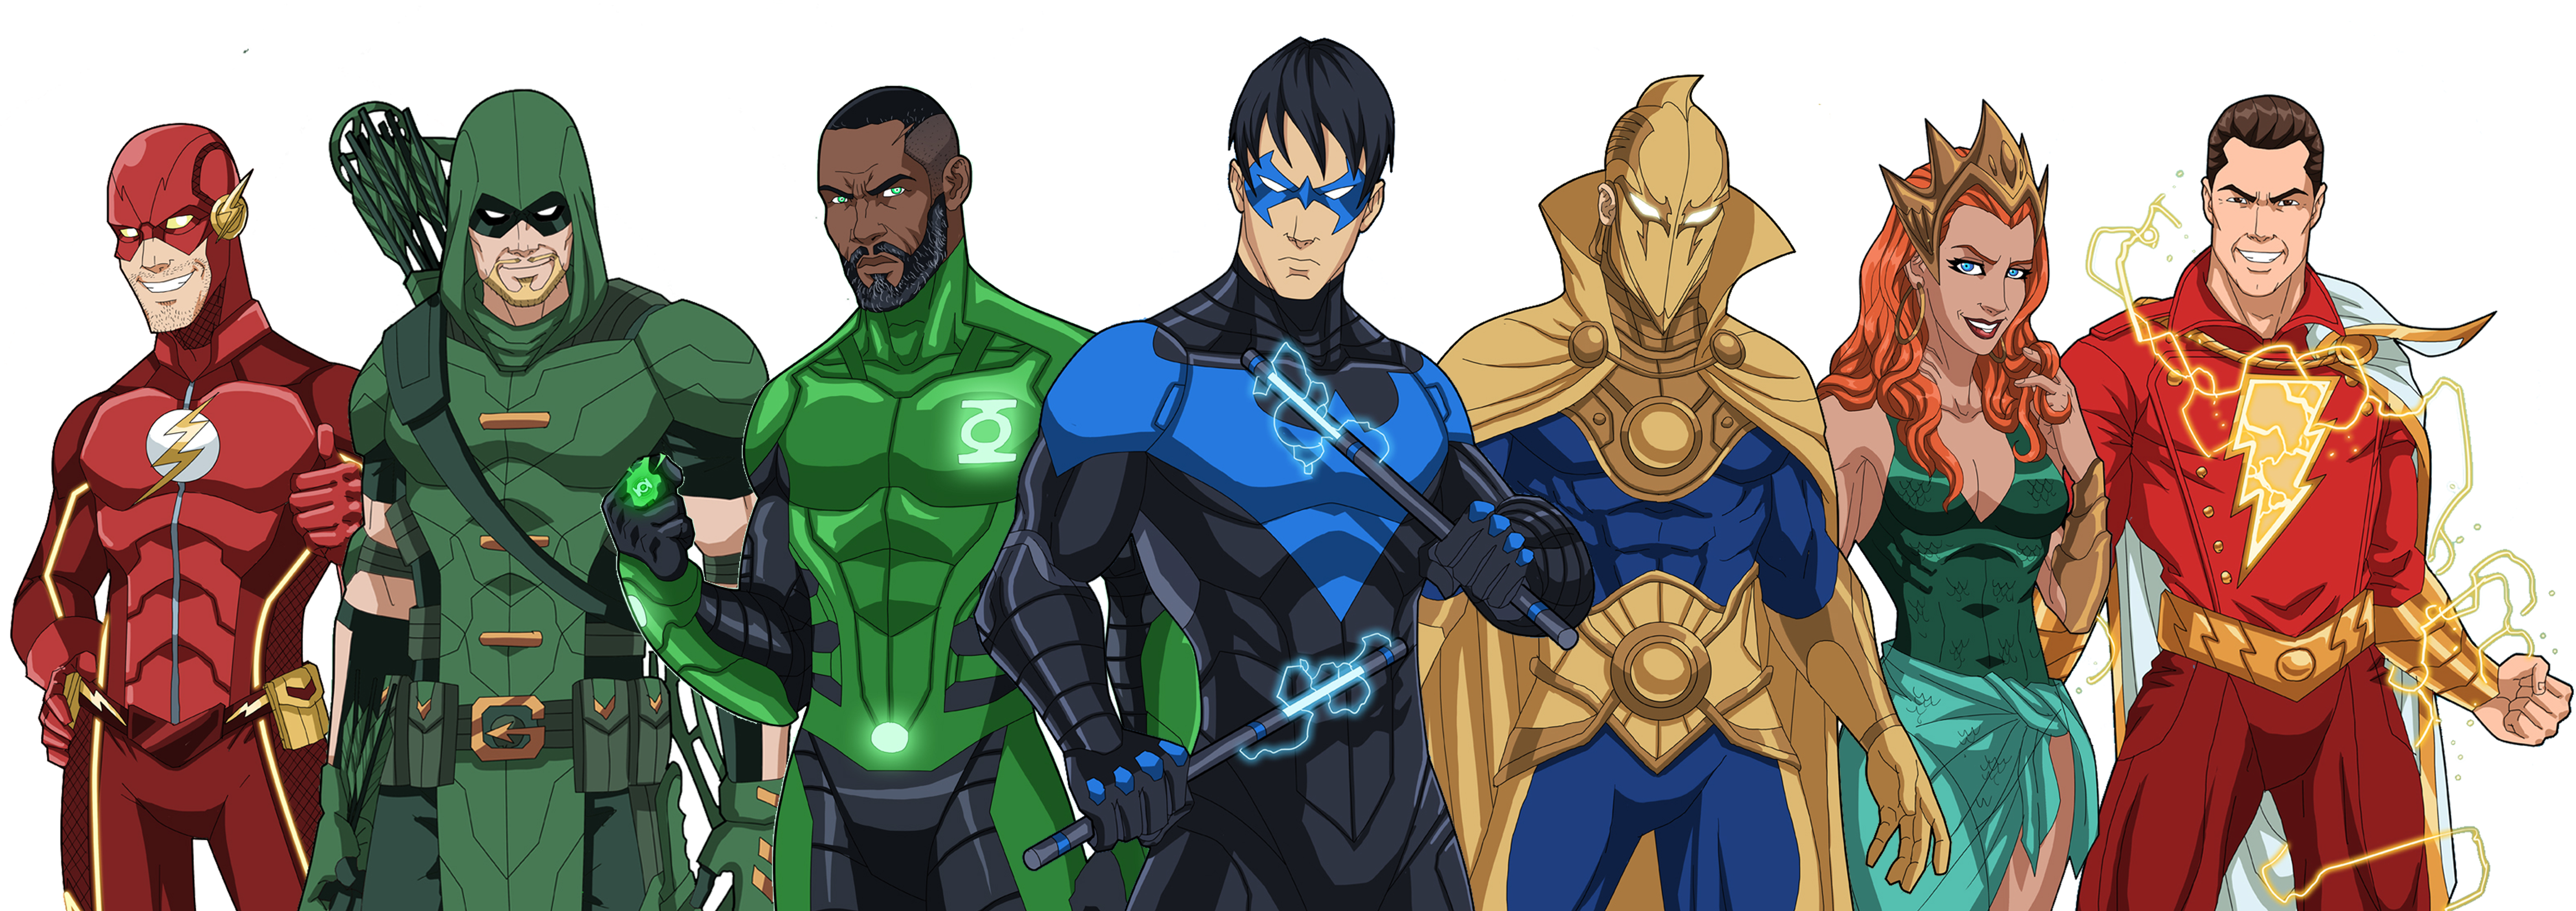 No Caption Provided - Alternate Justice League (7098x2492), Png Download